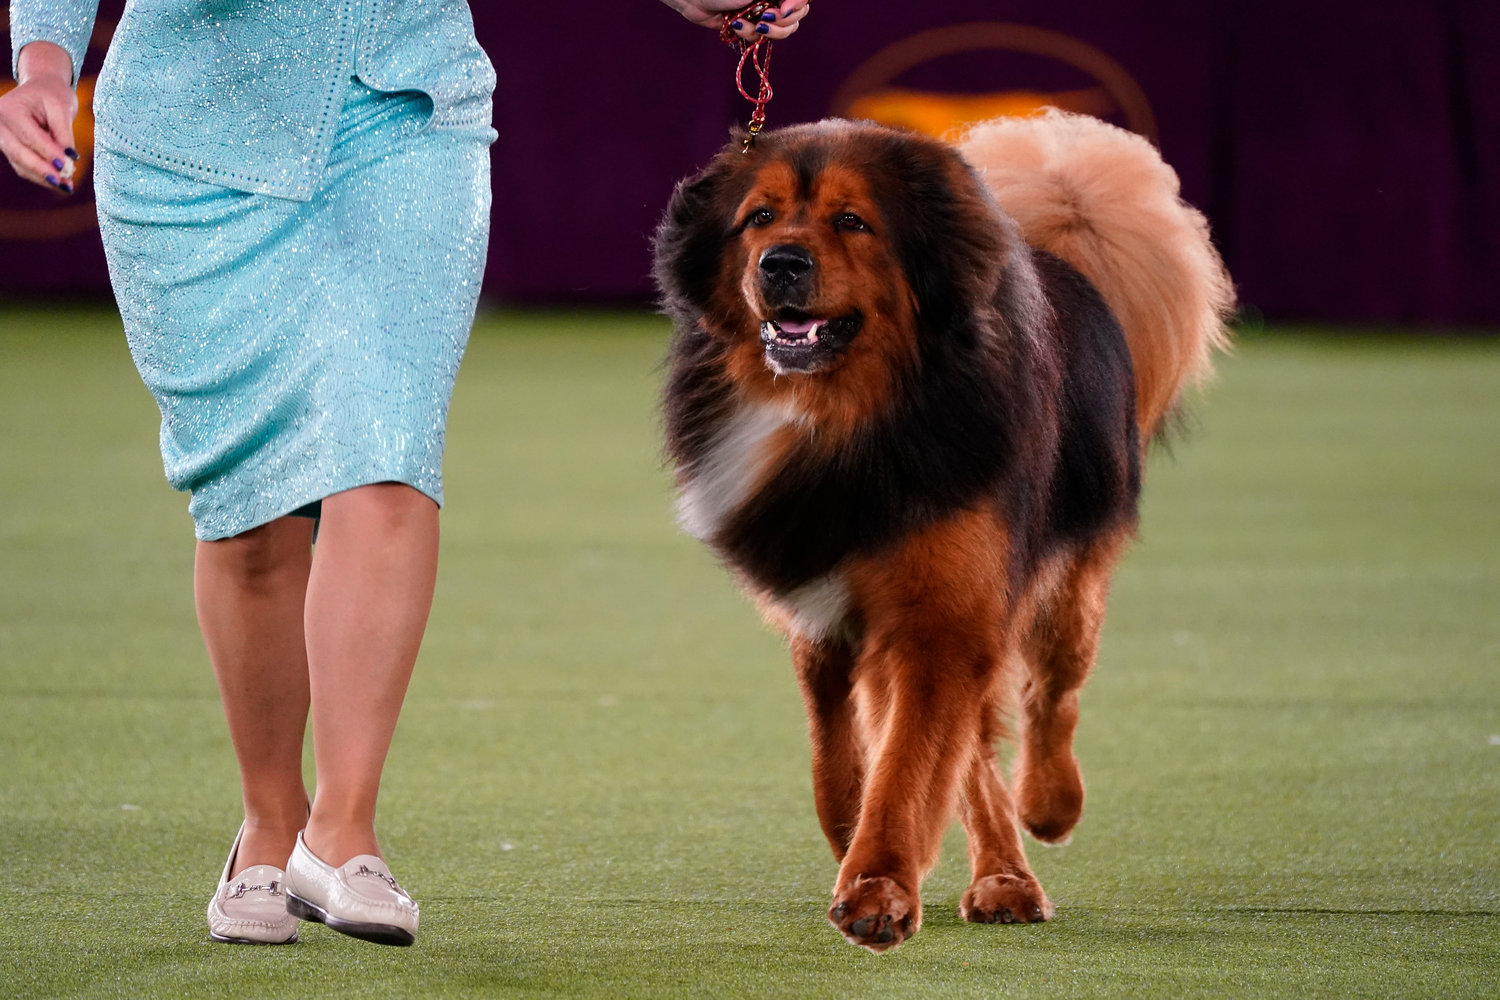 A Tibetan mastiff competes in the working group at the 146th Westminster Kennel Club Dog Show Wednesday, June 22, 2022, in Tarrytown, N.Y. Striker, a Samoyed, won the group.(AP Photo/Frank Franklin II)